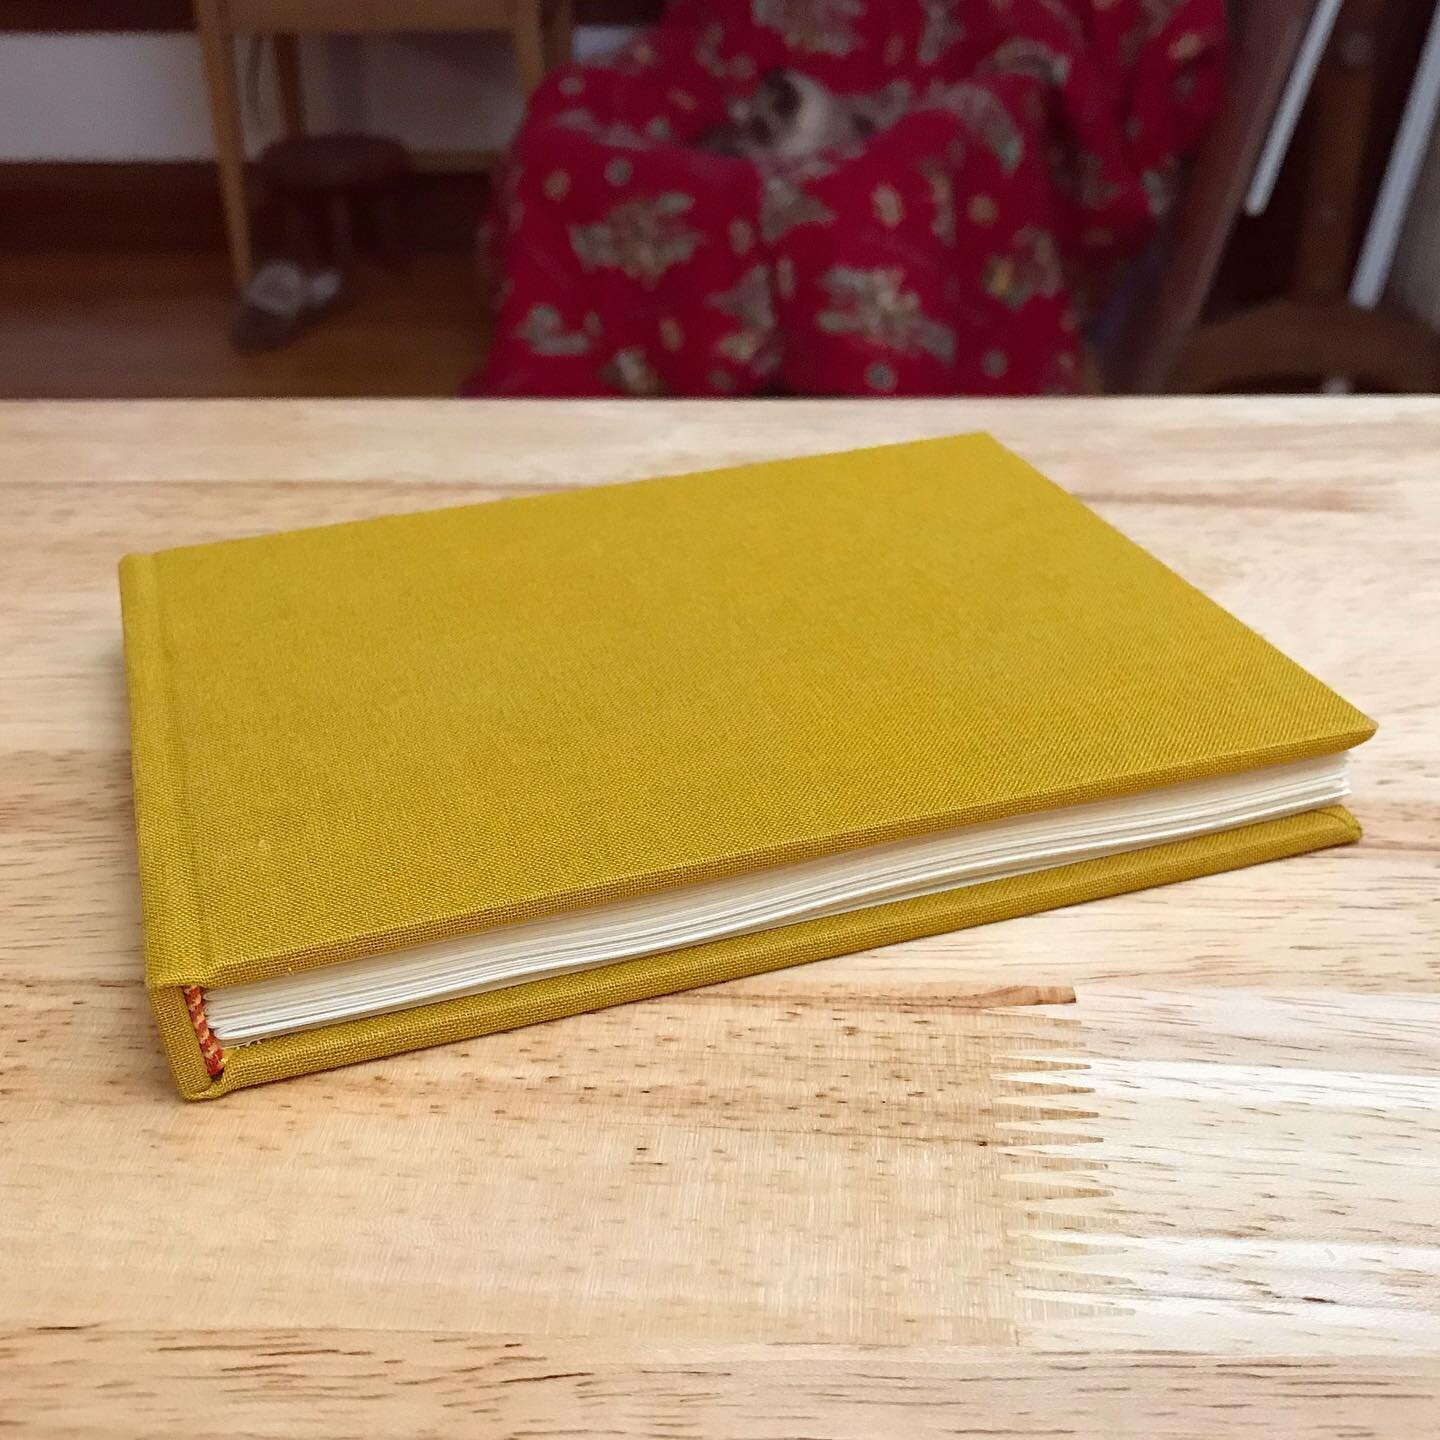 Making books has been one of my great pleasures; I dream in paper dimensions, in grain direction, in PVA glue viscosity&hellip; with every book I reveal something new within myself and what&rsquo;s more, I get to fill them with thoughts and visions a